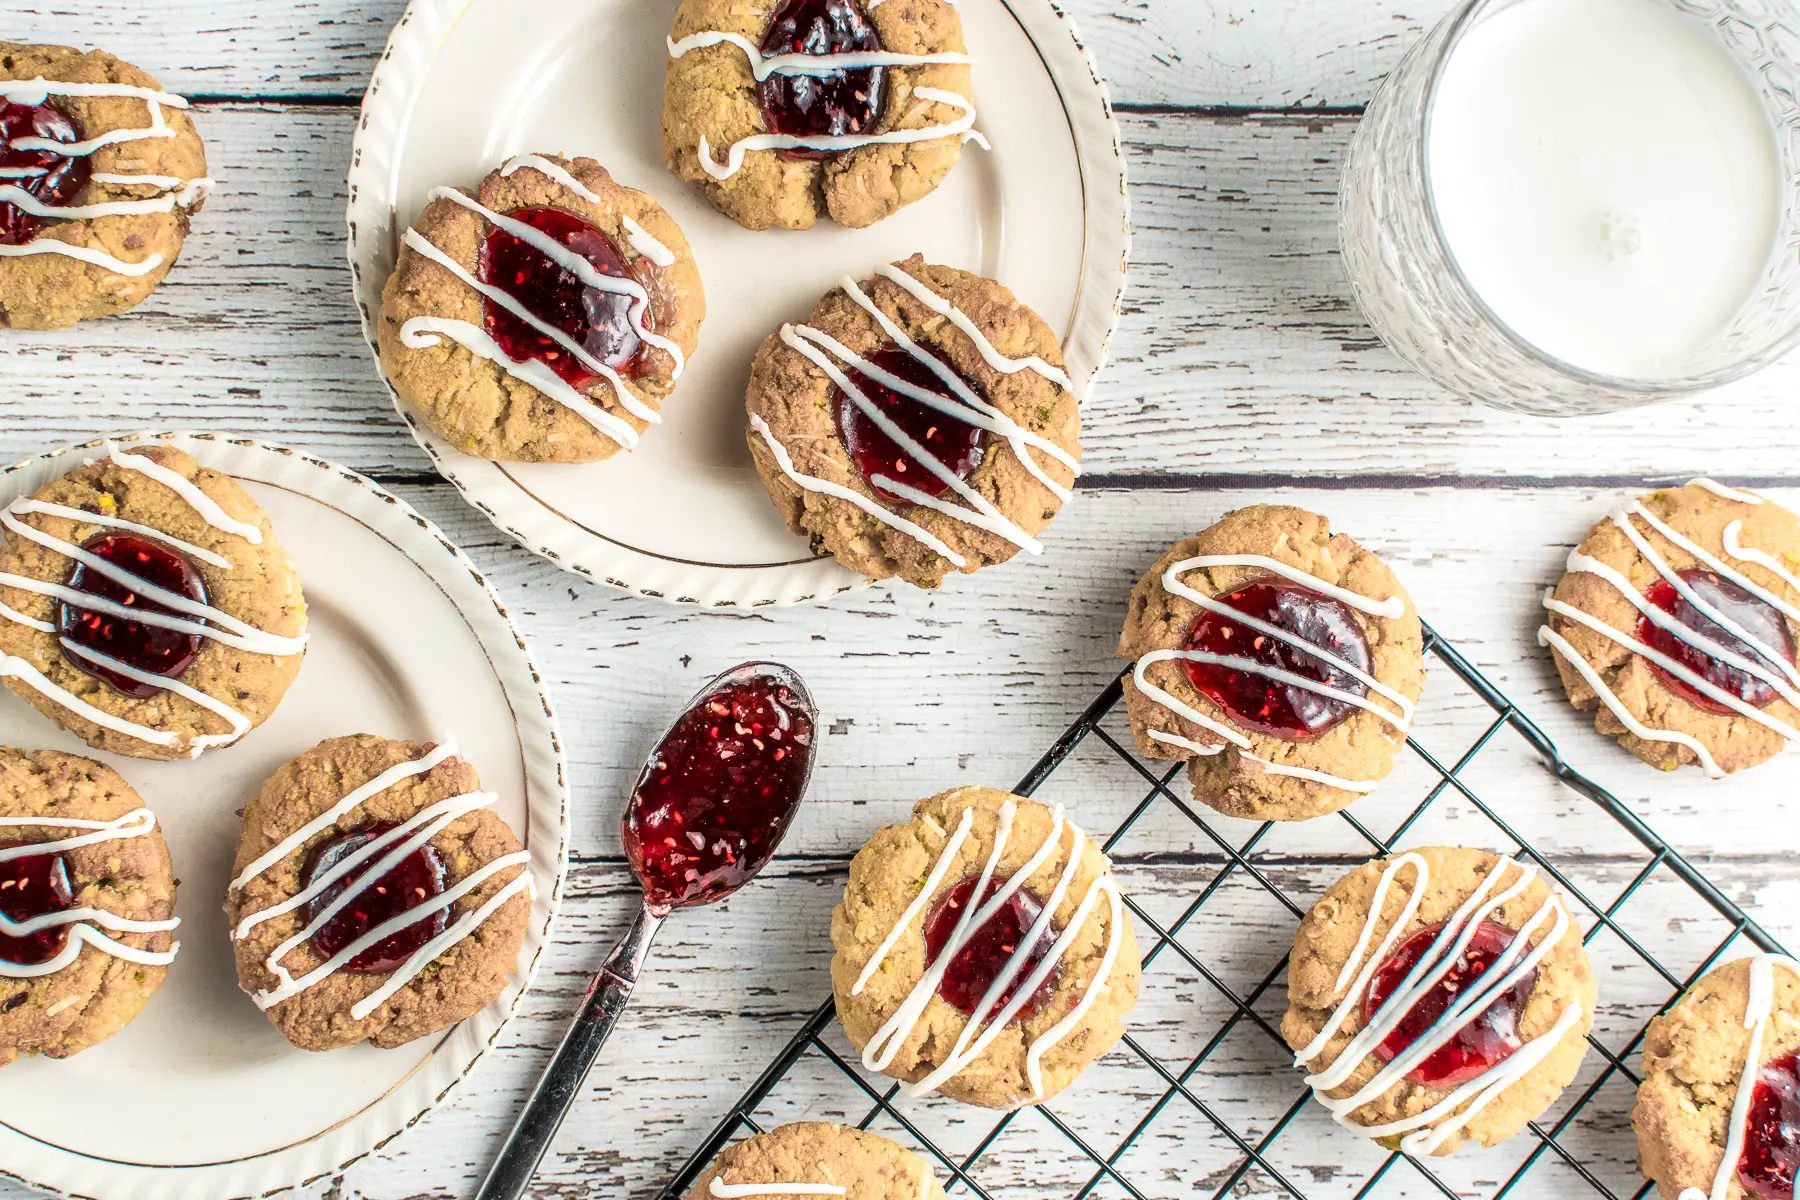 Keto raspberry jam thumbprint cookies on two, ivory, vintage dessert plates set on a rustic white barnyard backdrop. A glass of milk and a cooling rack with more cookies, along with a teaspoon filled with gooey, raspberry jam, complete the picture.